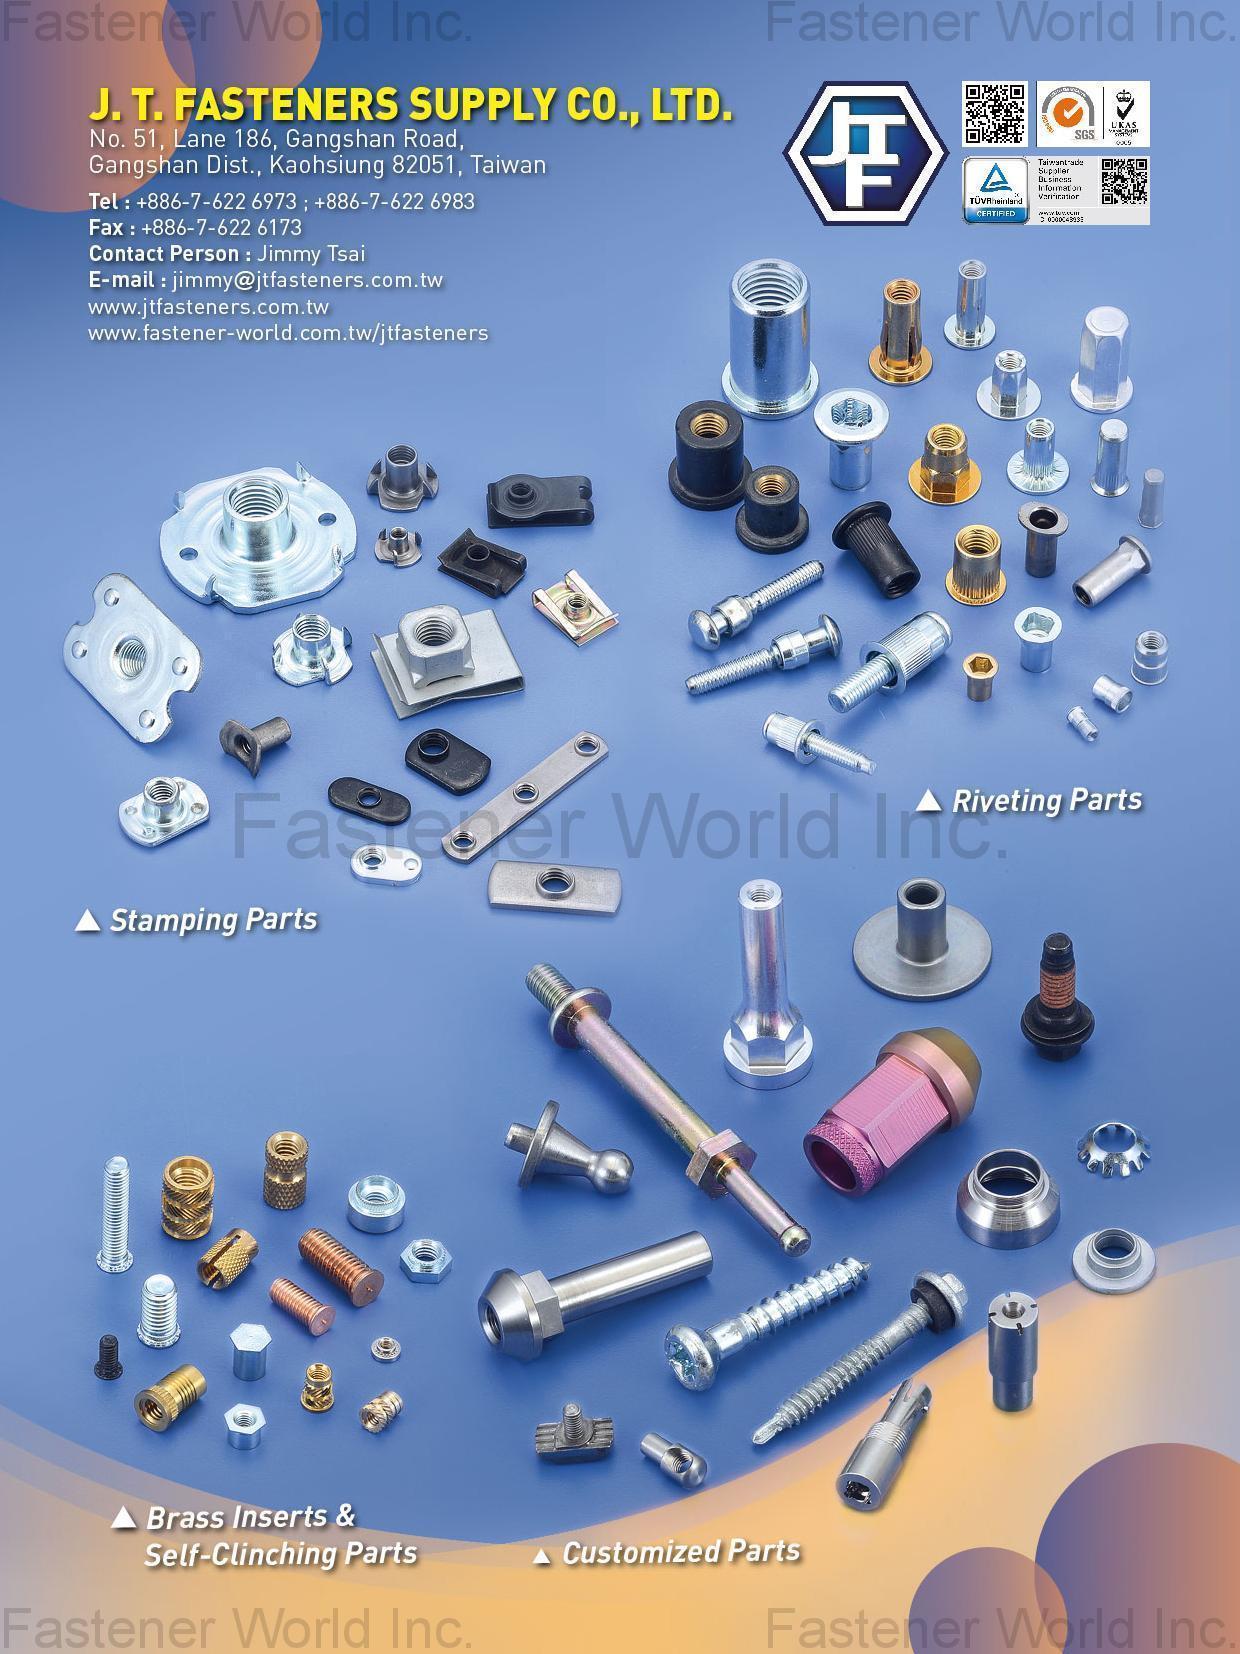 J. T. FASTENERS SUPPLY CO., LTD.  , Riveting Parts, Stamping Parts, Customized Parts, Brass Inserts & Self-Clinching Parts, Cage Nuts , Stamped Parts